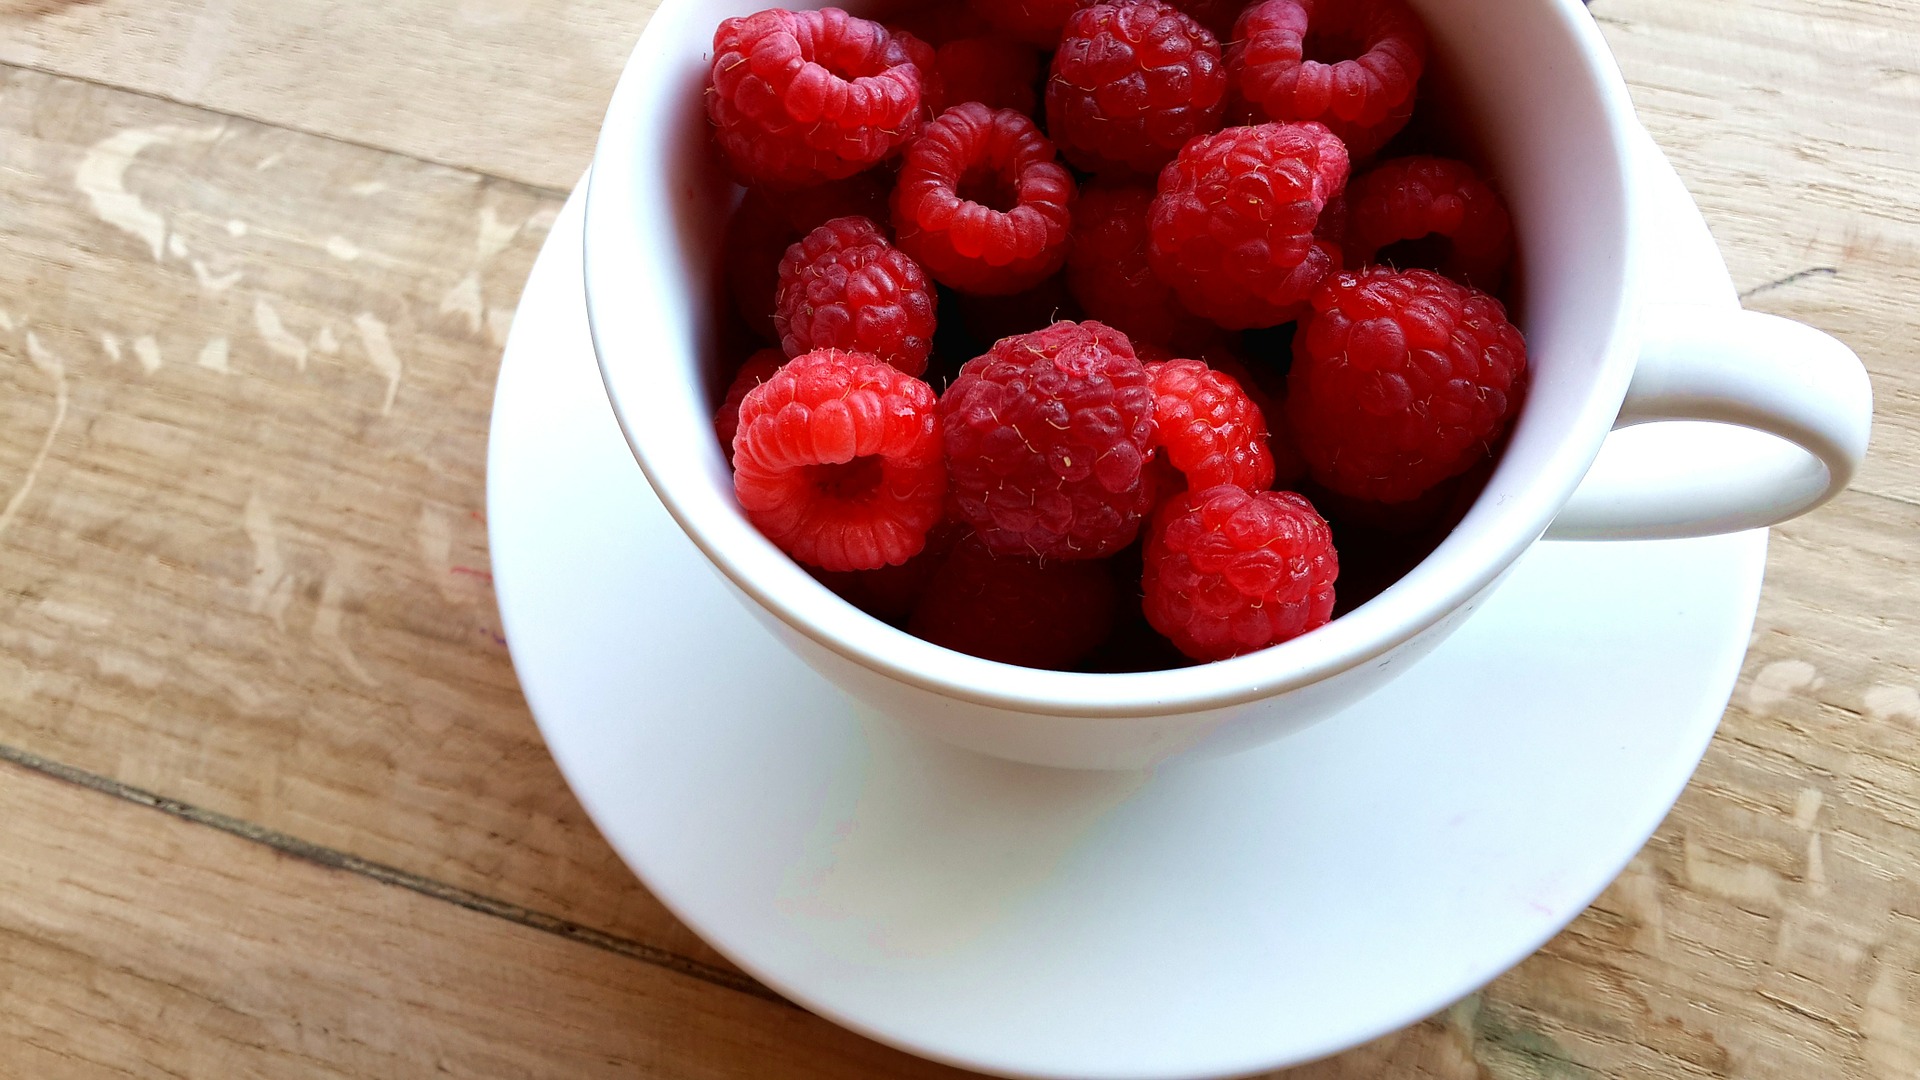 When ripe, raspberries are easily removed from the plant. Refrigerate immediately and use between three and five days after picking.